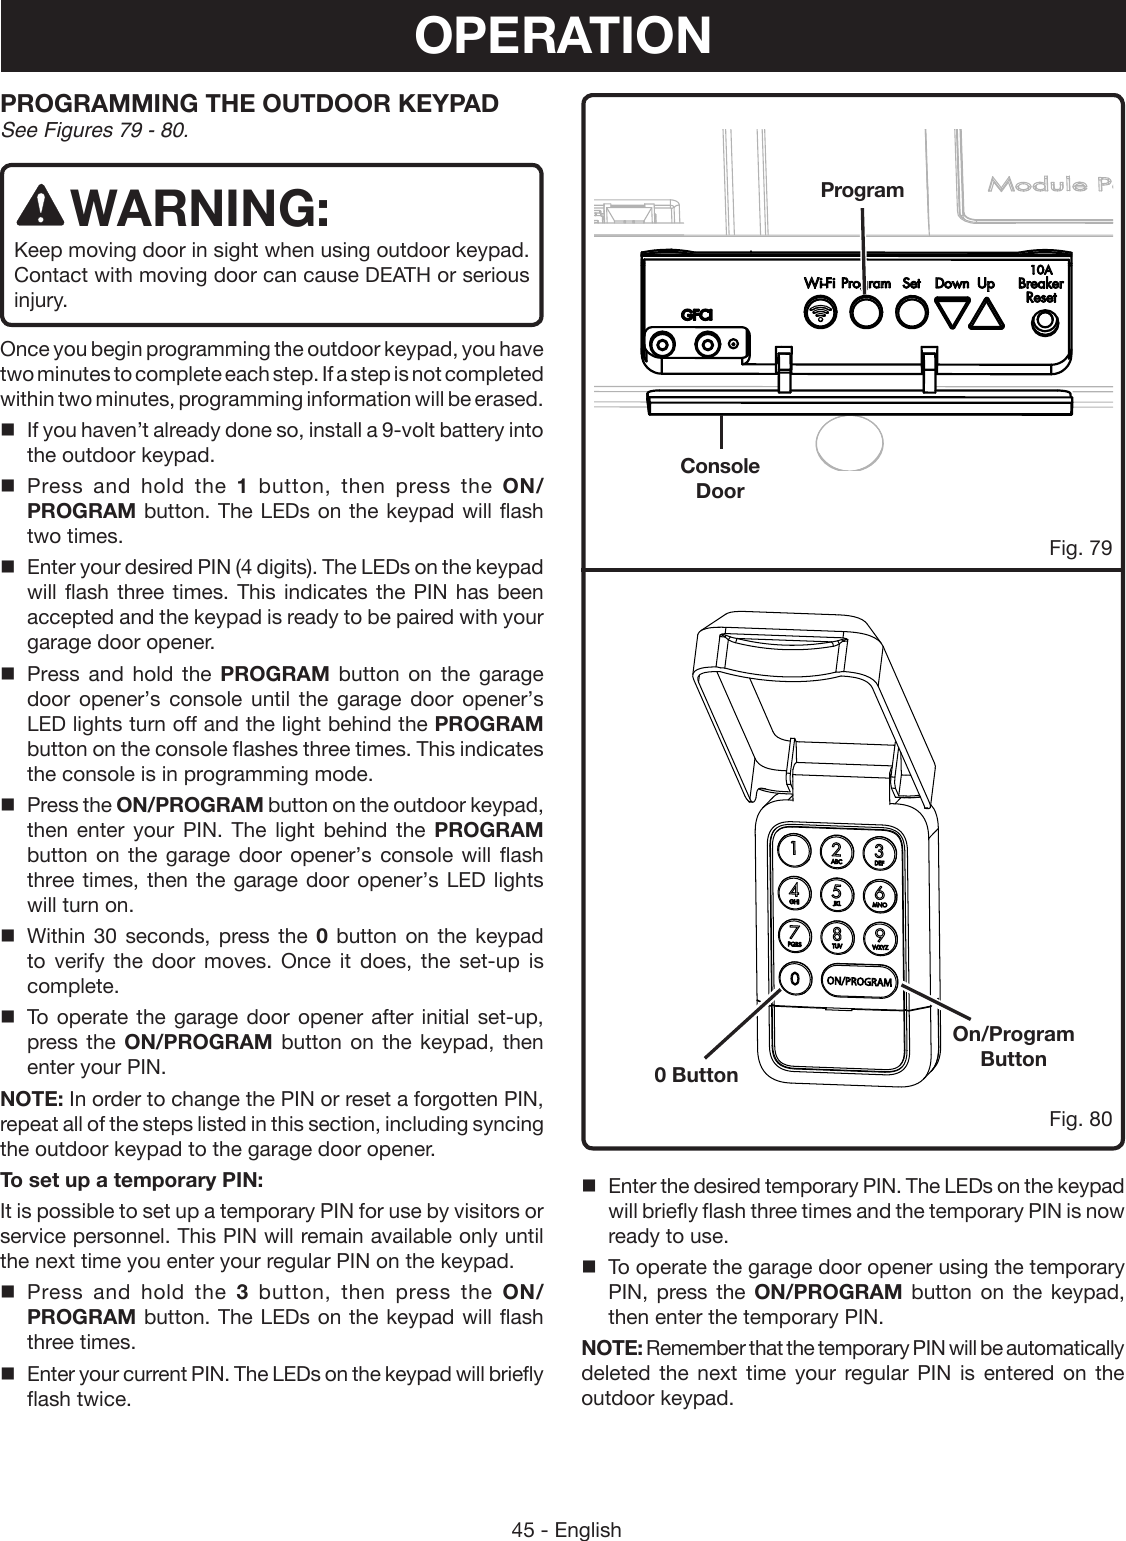 45 - EnglishPROGRAMMING THE OUTDOOR KEYPAD See Figures 79 - 80.WARNING:Keep moving door in sight when using outdoor keypad.  Contact with moving door can cause DEATH or serious injury. Once you begin programming the outdoor keypad, you have two minutes to complete each step. If a step is not completed within two minutes, programming information will be erased.If you haven’t already done so, install a 9-volt battery into the outdoor keypad. Press and hold the 1  button, then press the ON/PROGRAM button. The LEDs on the keypad will flash two times.Enter your desired PIN (4 digits). The LEDs on the keypad will flash three times. This indicates the PIN has been accepted and the keypad is ready to be paired with your garage door opener.Press and hold the PROGRAM button on the garage door opener’s console until the garage door opener’s LED lights turn off and the light behind the PROGRAM button on the console flashes three times. This indicates the console is in programming mode.Press the ON/PROGRAM button on the outdoor keypad, then enter your PIN. The light behind the PROGRAM button on the garage door opener’s console will flash three times, then the garage door opener’s LED lights will turn on.Within 30 seconds, press the 0 button on the keypad to verify the door moves. Once it does, the set-up is complete.To operate the garage door opener after initial set-up, press the ON/PROGRAM button on the keypad, then enter your PIN.NOTE: In order to change the PIN or reset a forgotten PIN, repeat all of the steps listed in this section, including syncing the outdoor keypad to the garage door opener.To set up a temporary PIN:It is possible to set up a temporary PIN for use by visitors or service personnel. This PIN will remain available only until the next time you enter your regular PIN on the keypad.Press and hold the 3  button, then press the ON/PROGRAM button. The LEDs on the keypad will flash three times.Enter your current PIN. The LEDs on the keypad will briefly flash twice. 0 ButtonOn/Program ButtonProgramConsole DoorFig. 80Fig. 79OPERATIONEnter the desired temporary PIN. The LEDs on the keypad will briefly flash three times and the temporary PIN is now ready to use.To operate the garage door opener using the temporary PIN, press the ON/PROGRAM button on the keypad, then enter the temporary PIN.NOTE: Remember that the temporary PIN will be automatically deleted the next time your regular PIN is entered on the outdoor keypad. 